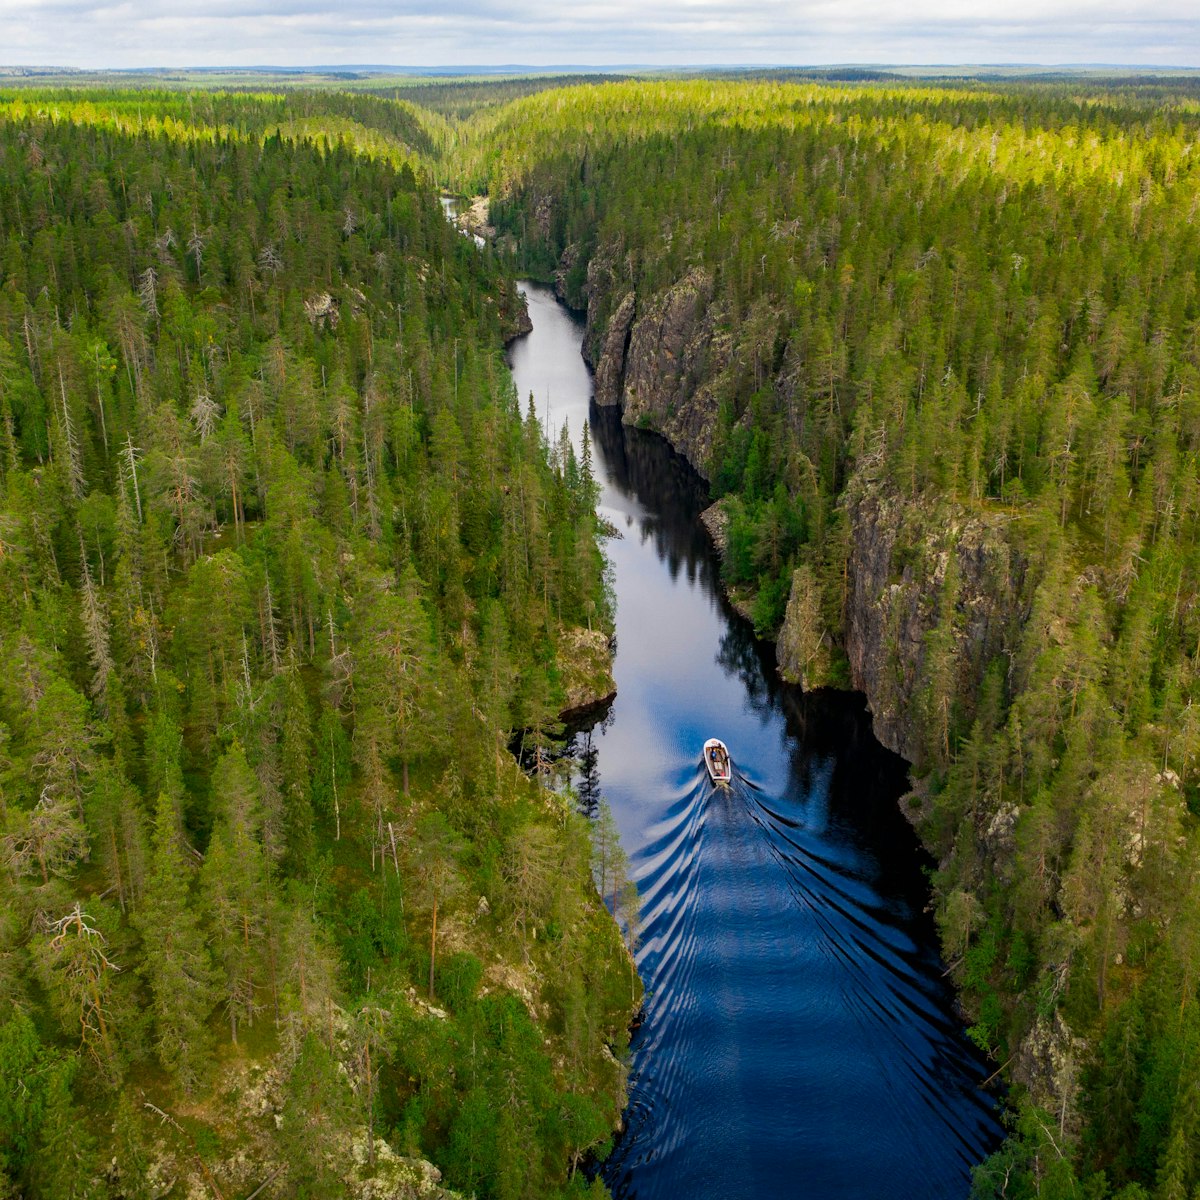 Aerial view of a boat, canyon lake and forest in Julma-Ölkky, Hossa National Park, Finland; Shutterstock ID 2023369706; purchase_order: 65050; job: ; client: ; other:
2023369706